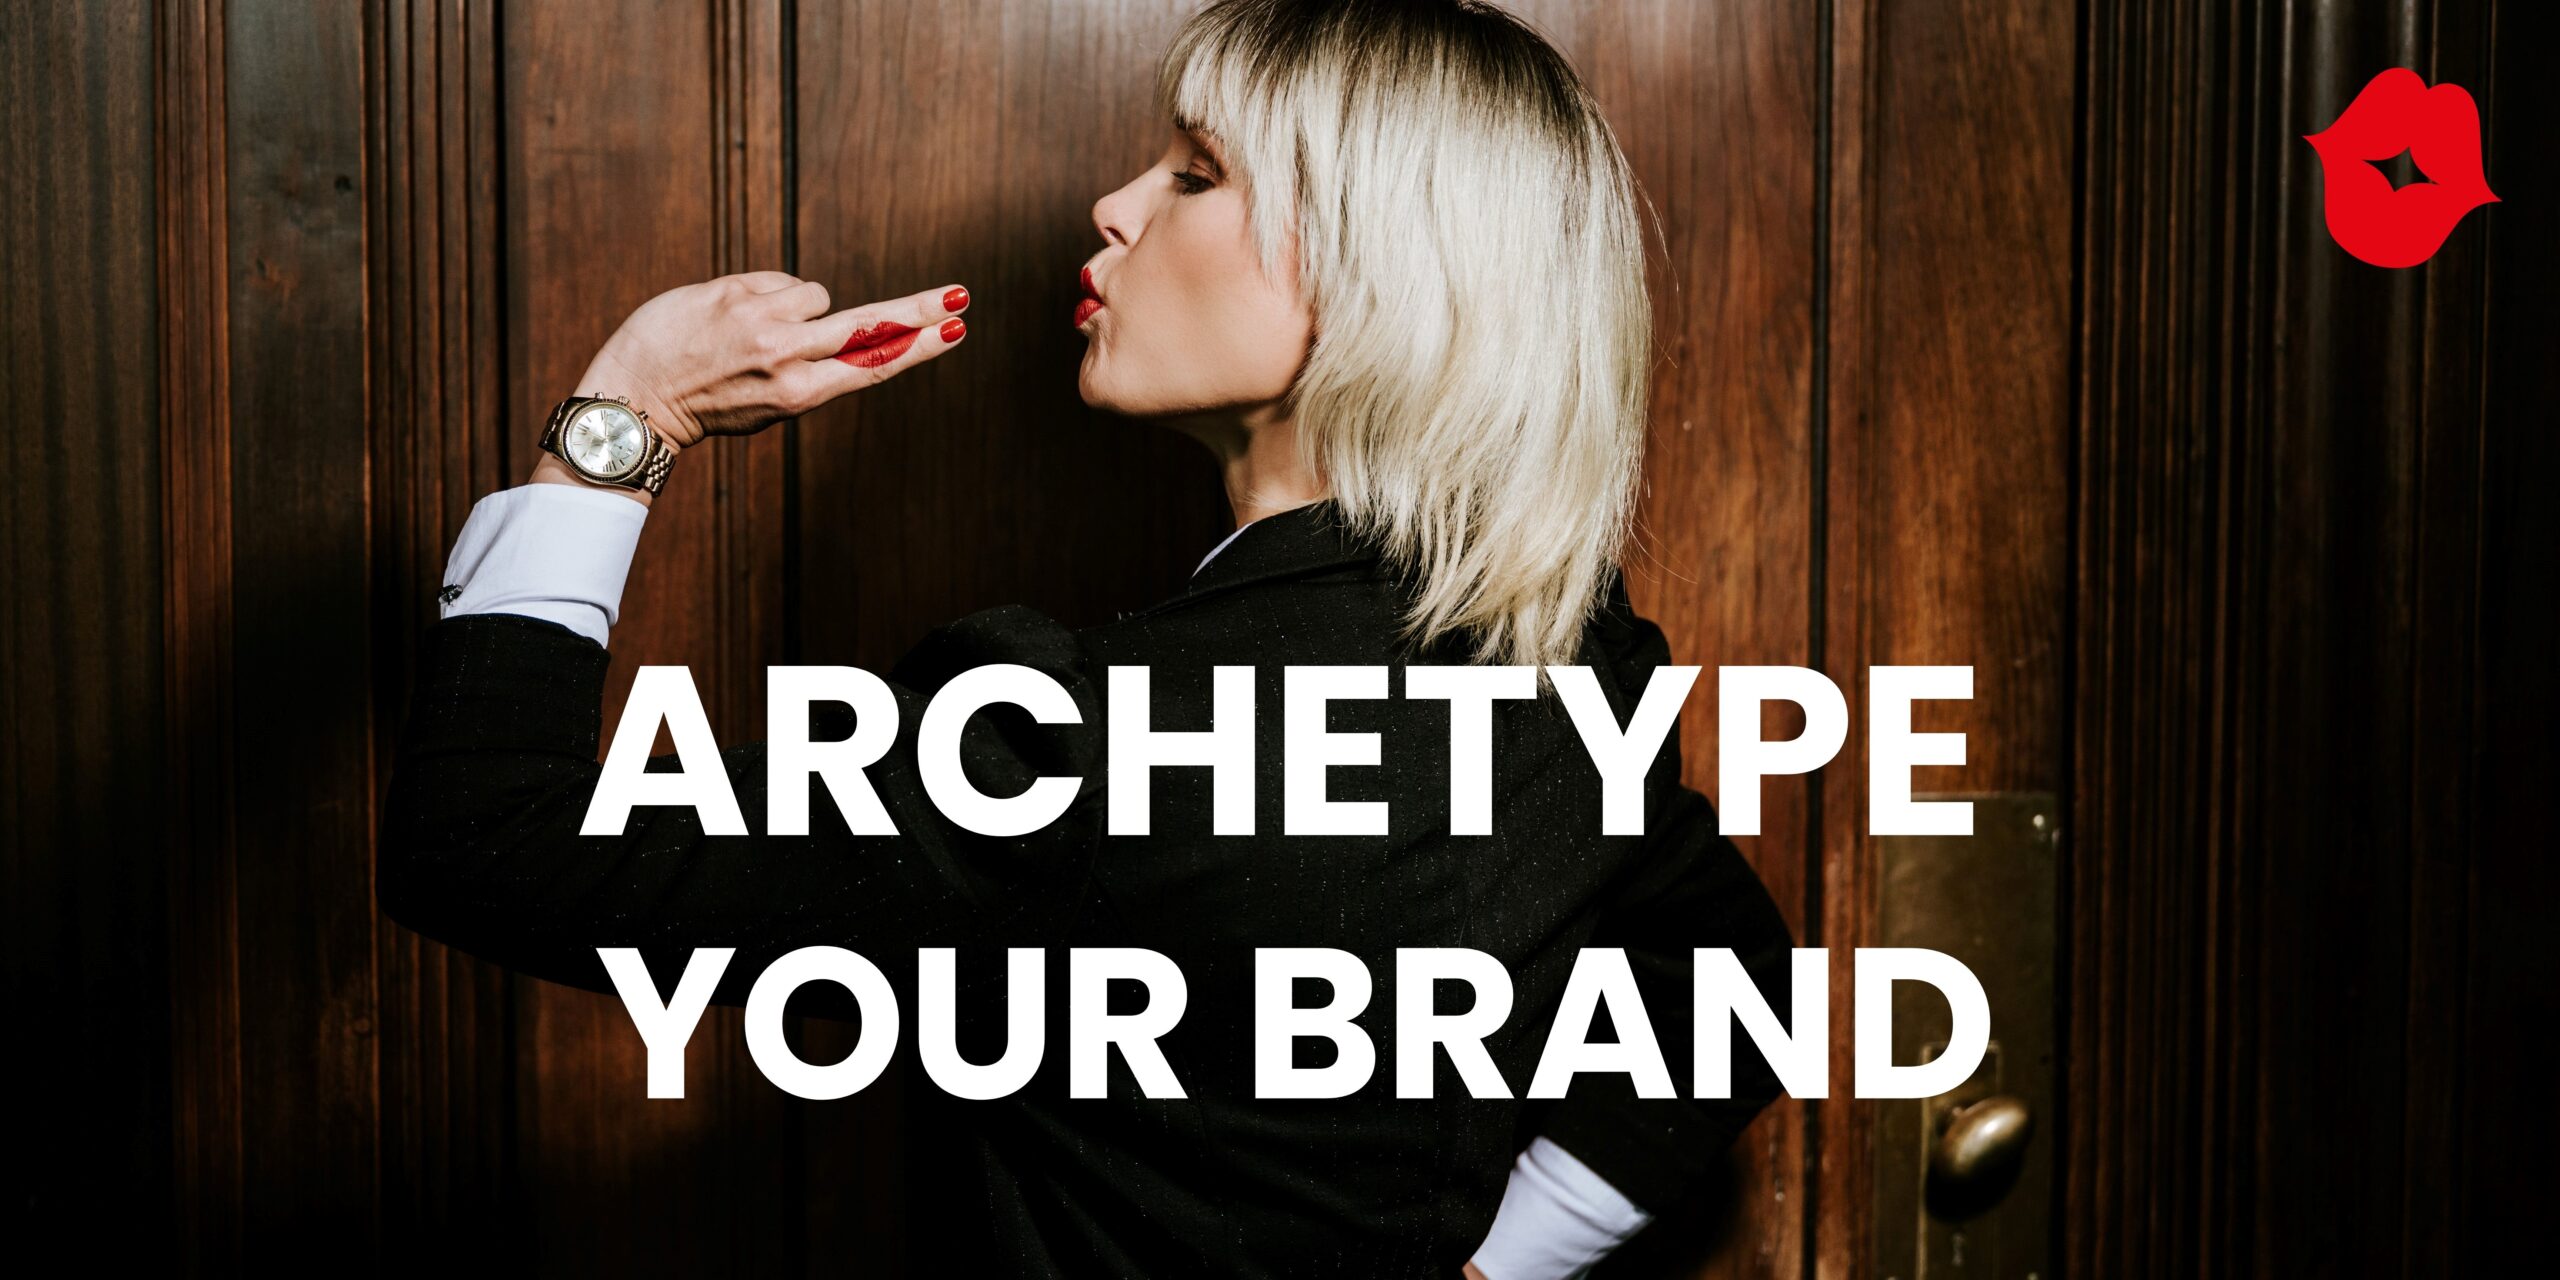 Archetype your brand - Traject